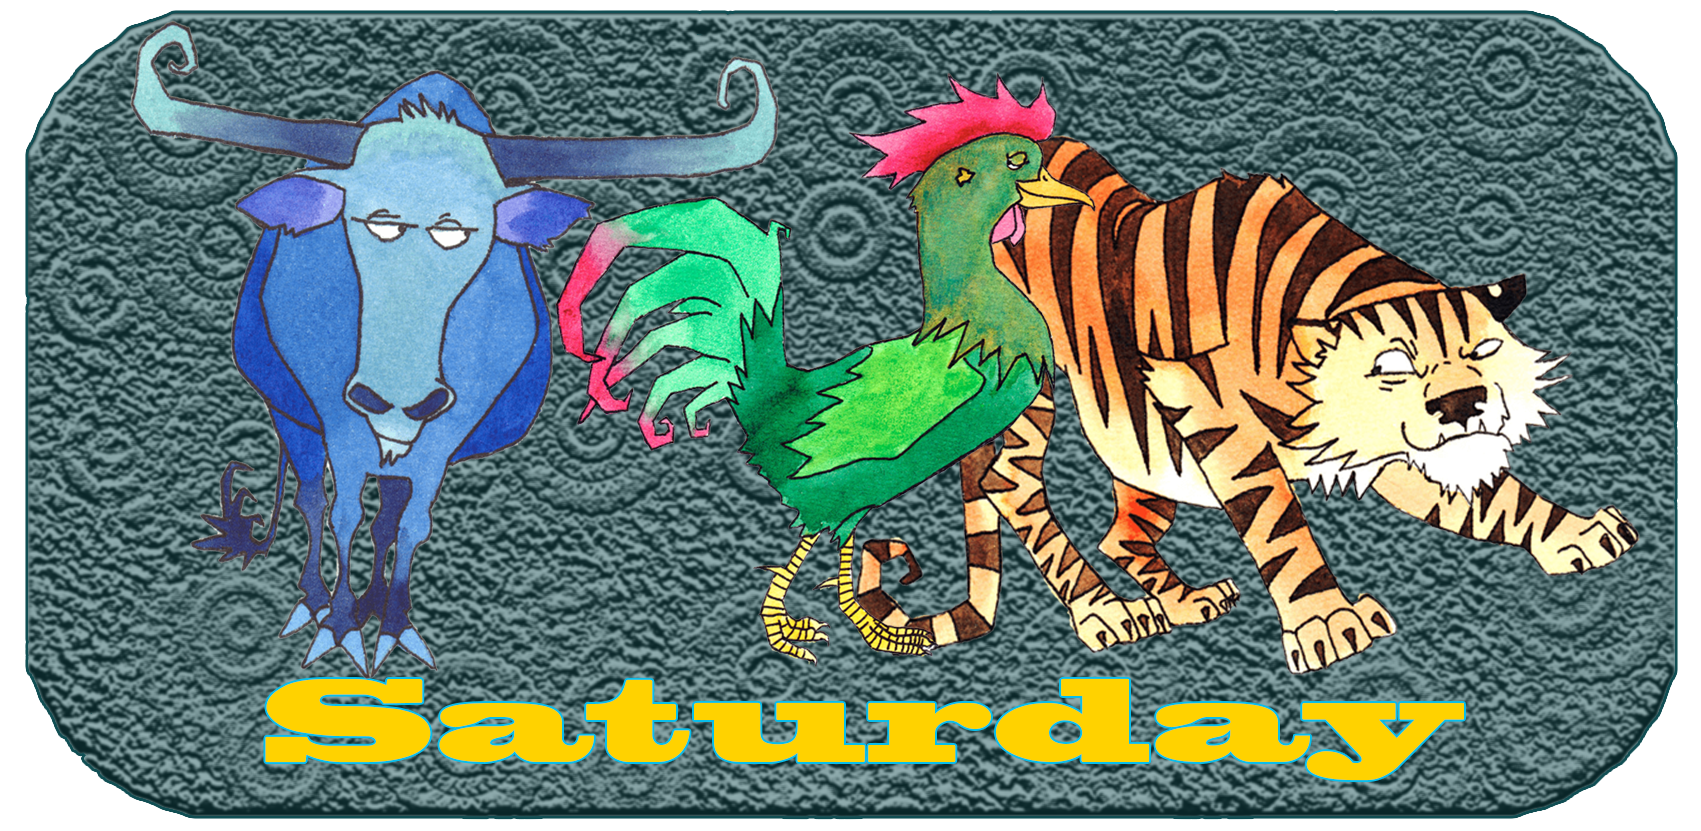 Chinese animal | Days of the week | Saturday | Bull, Rooster, Tiger